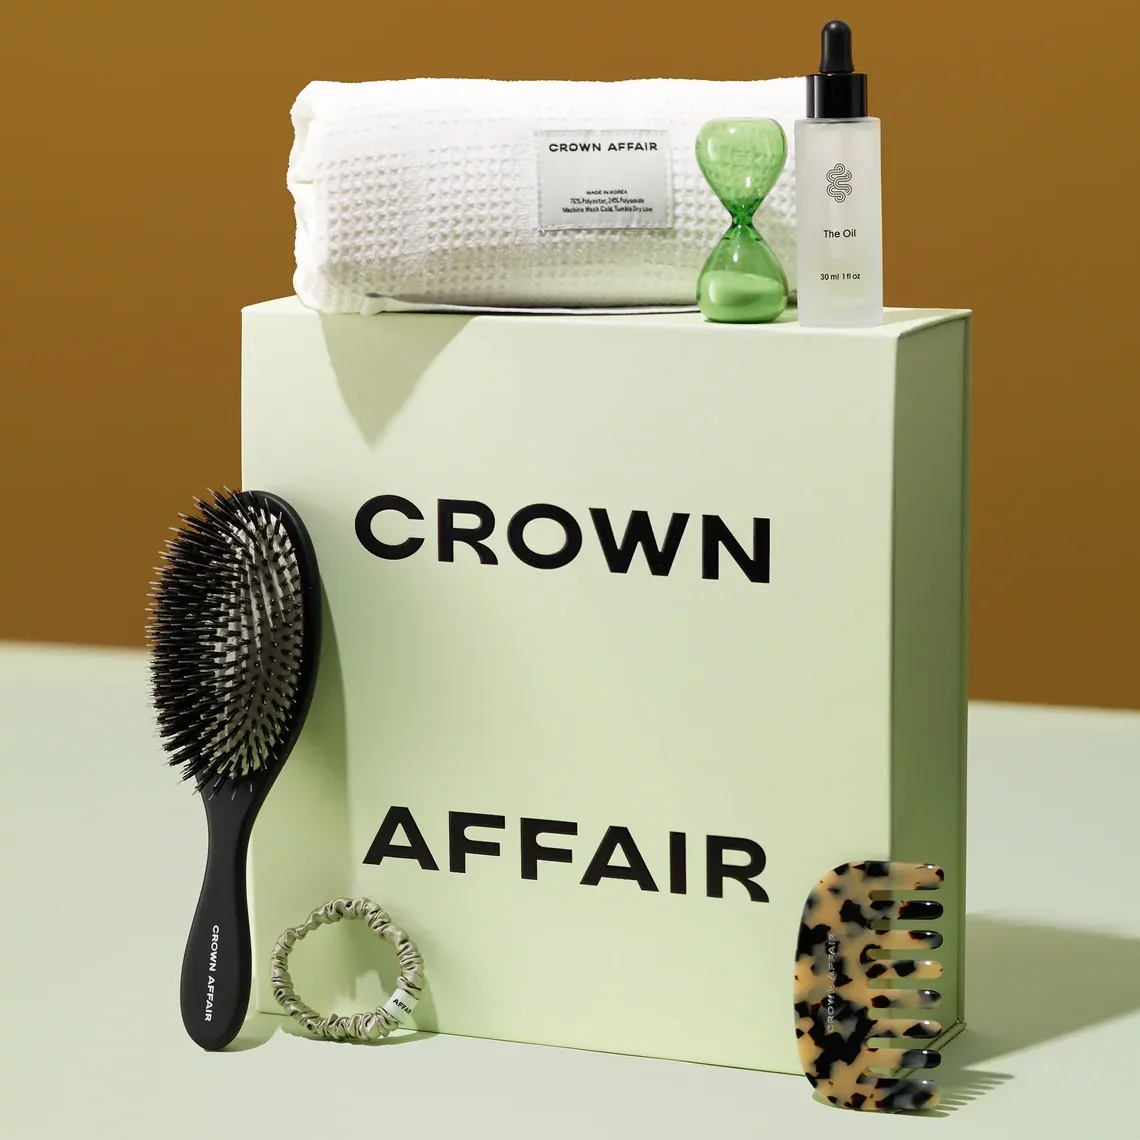 Crown Affair's haircare all-in-on set (which includes a hair brush, comb, scrunchie, towel, and 3-minute hourglass timer) around its mint packaging against a mint and brown background.